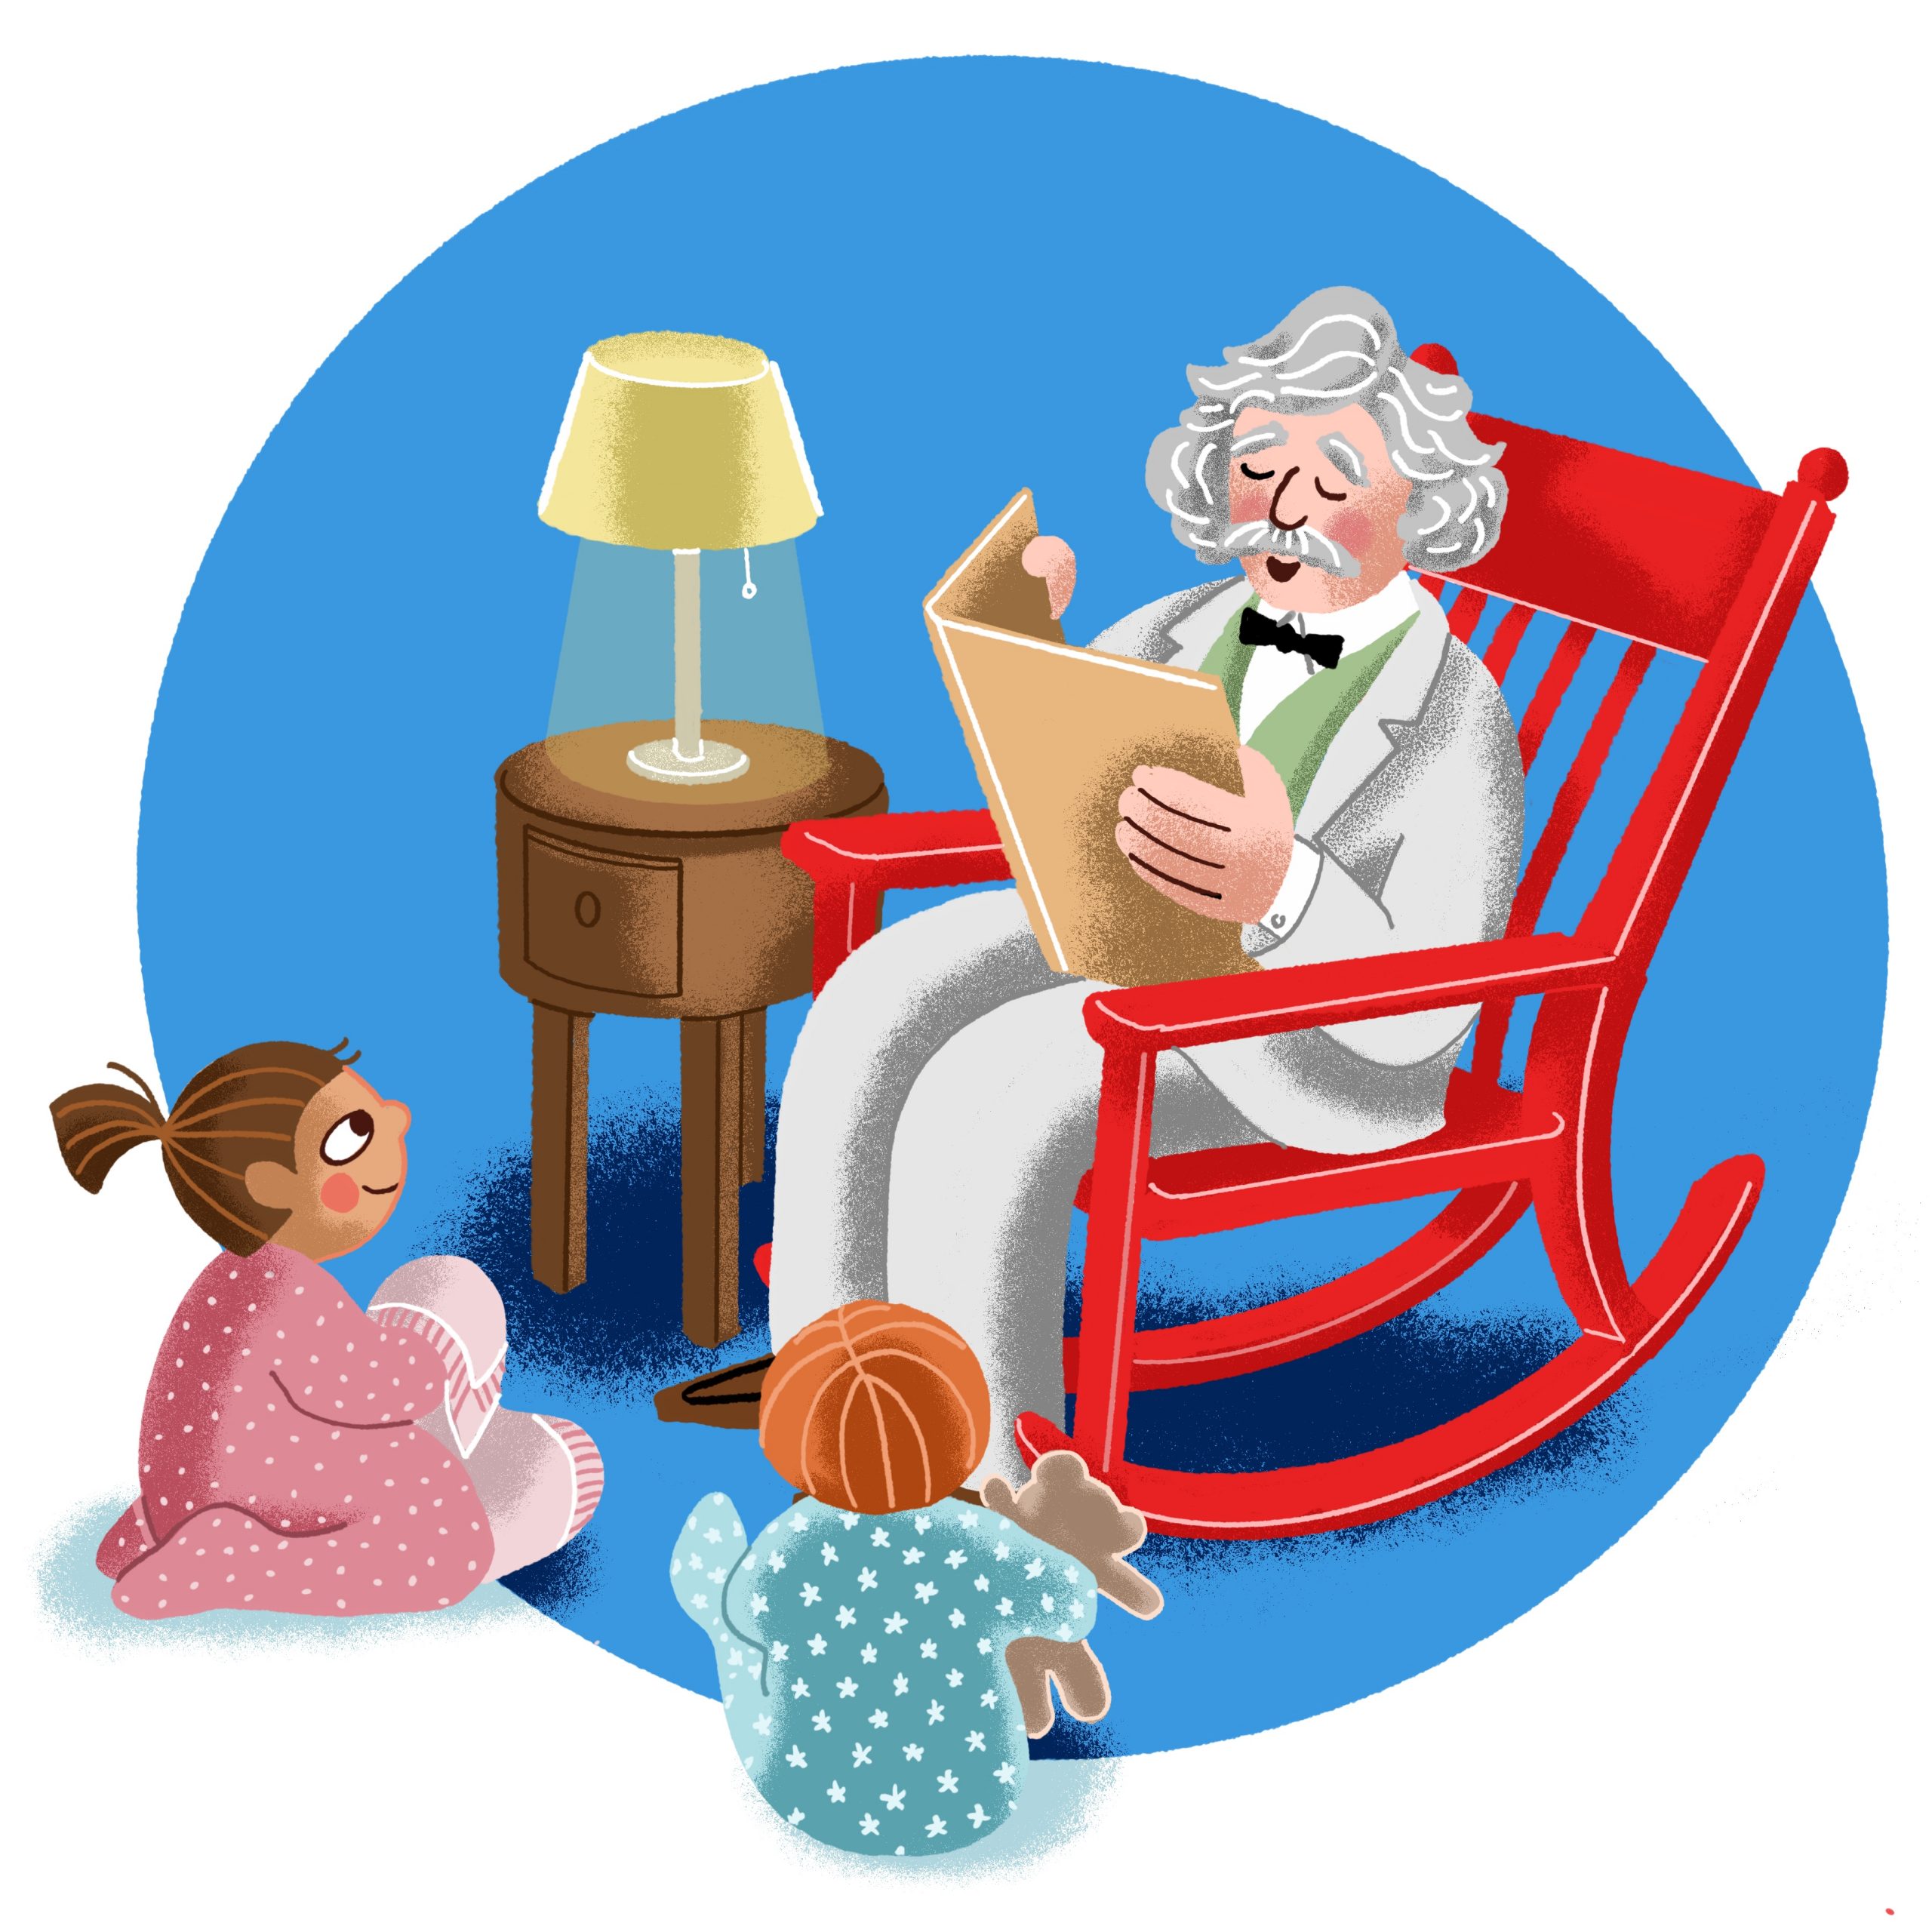 Evening Pajama Family Story Time (Ages Birth-5)